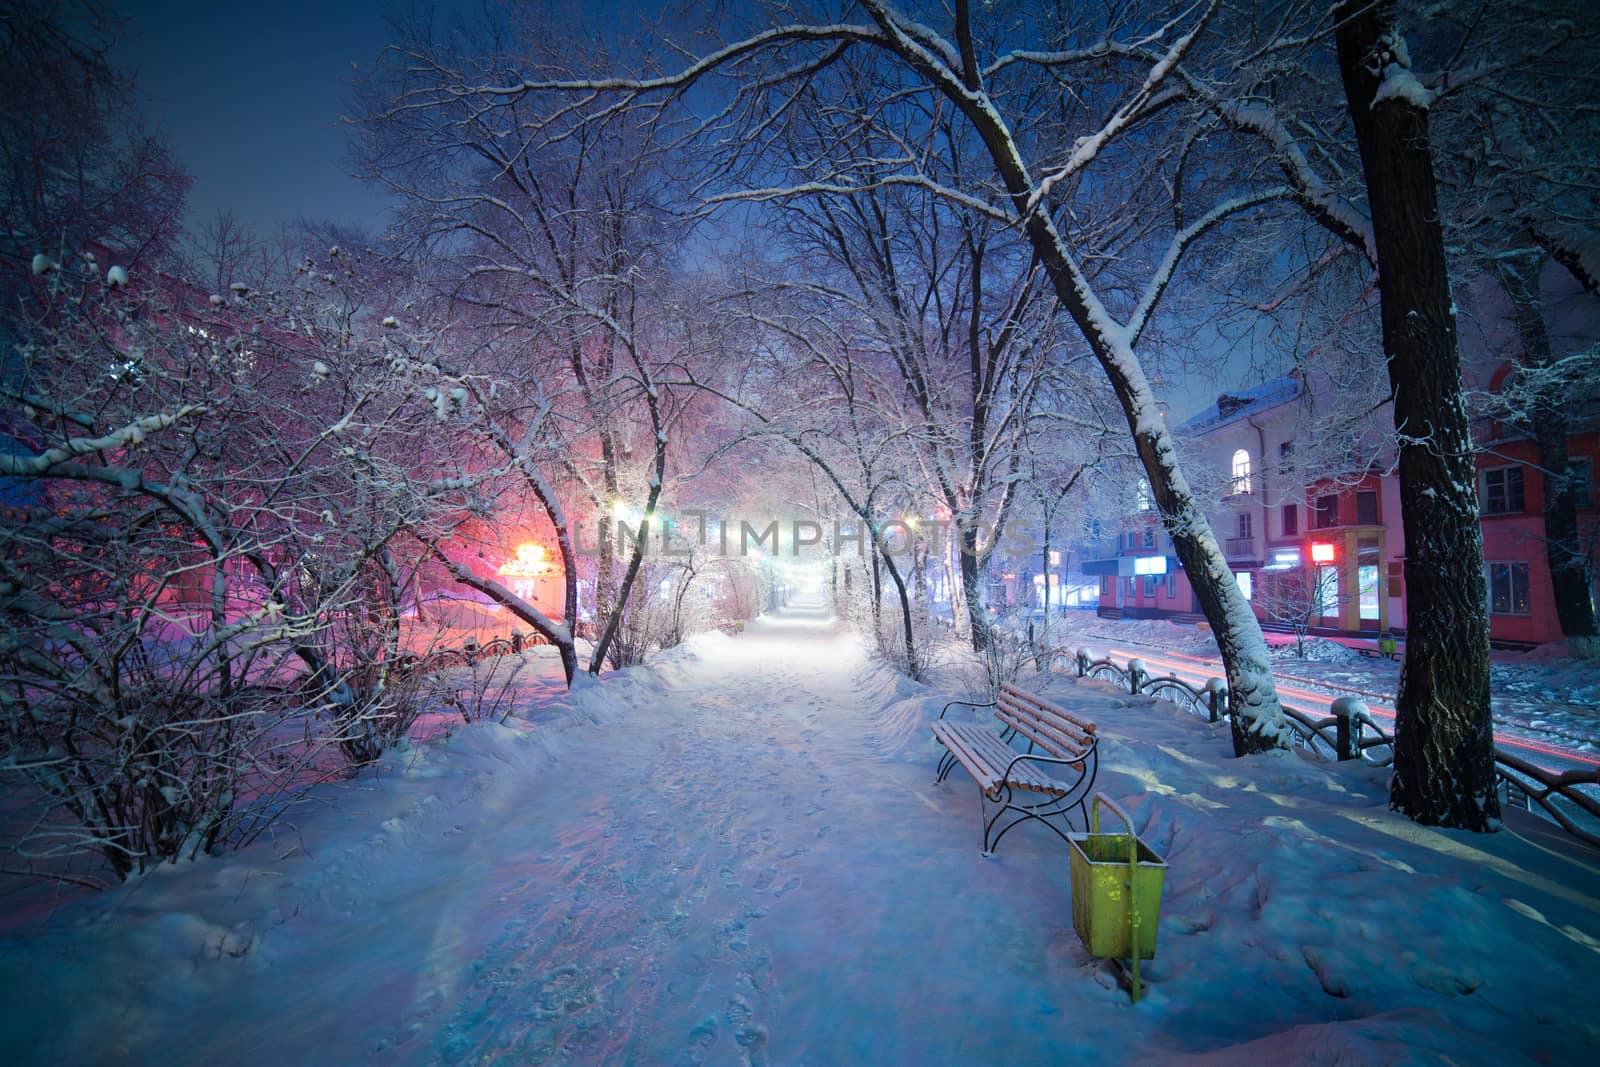 Winter landscape, night alley with bench. Beautiful light and atmosphere. The pathway creates depth in this image allowing viewers eye to progress into scene. Winter wonderland, nice mood and colors. Fairytail.